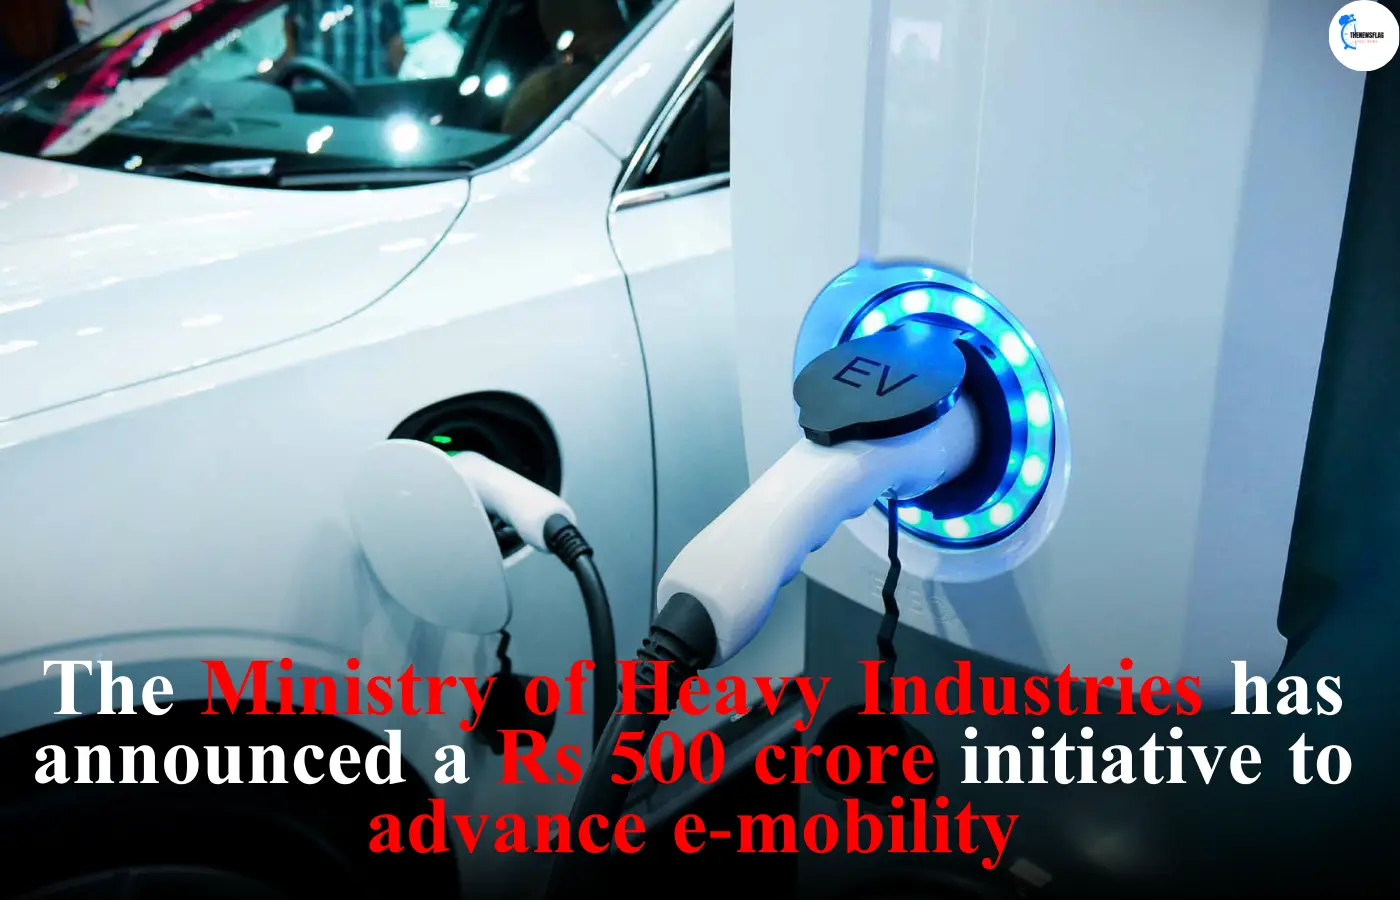 The Ministry of Heavy Industries has announced a Rs 500 crore initiative to advance e-mobility